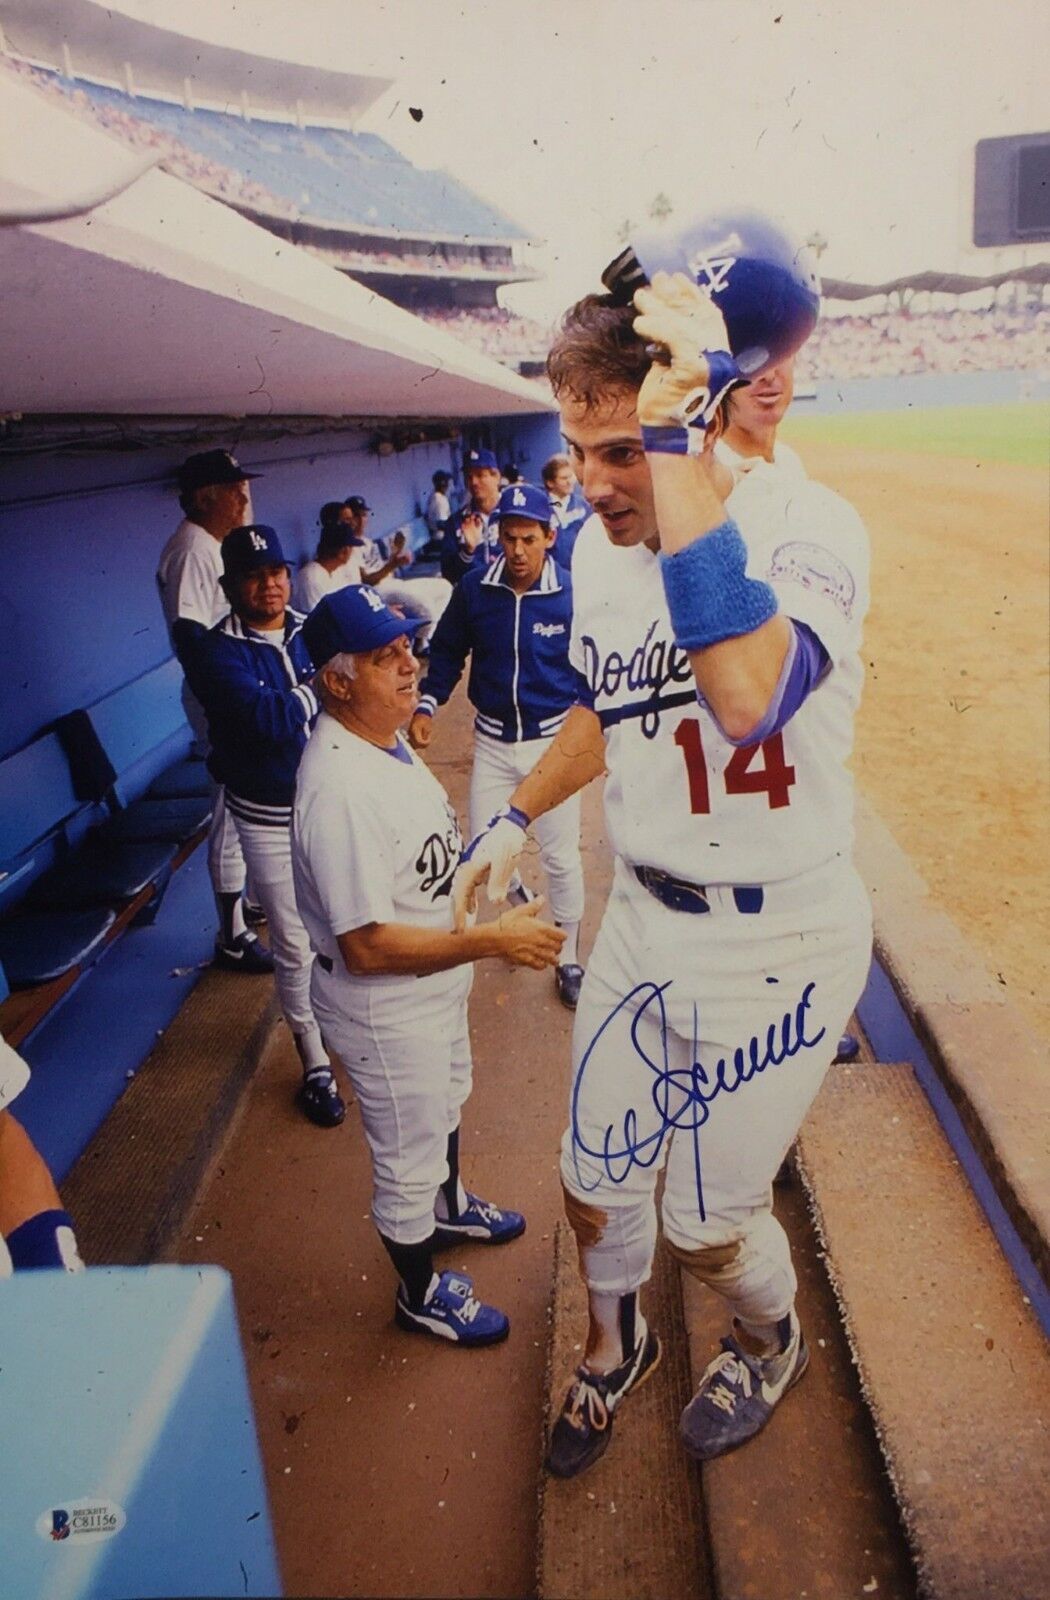 Mike Scioscia Signed Dodgers Baseball 12x18 Photo Poster painting Beckett BAS C81156